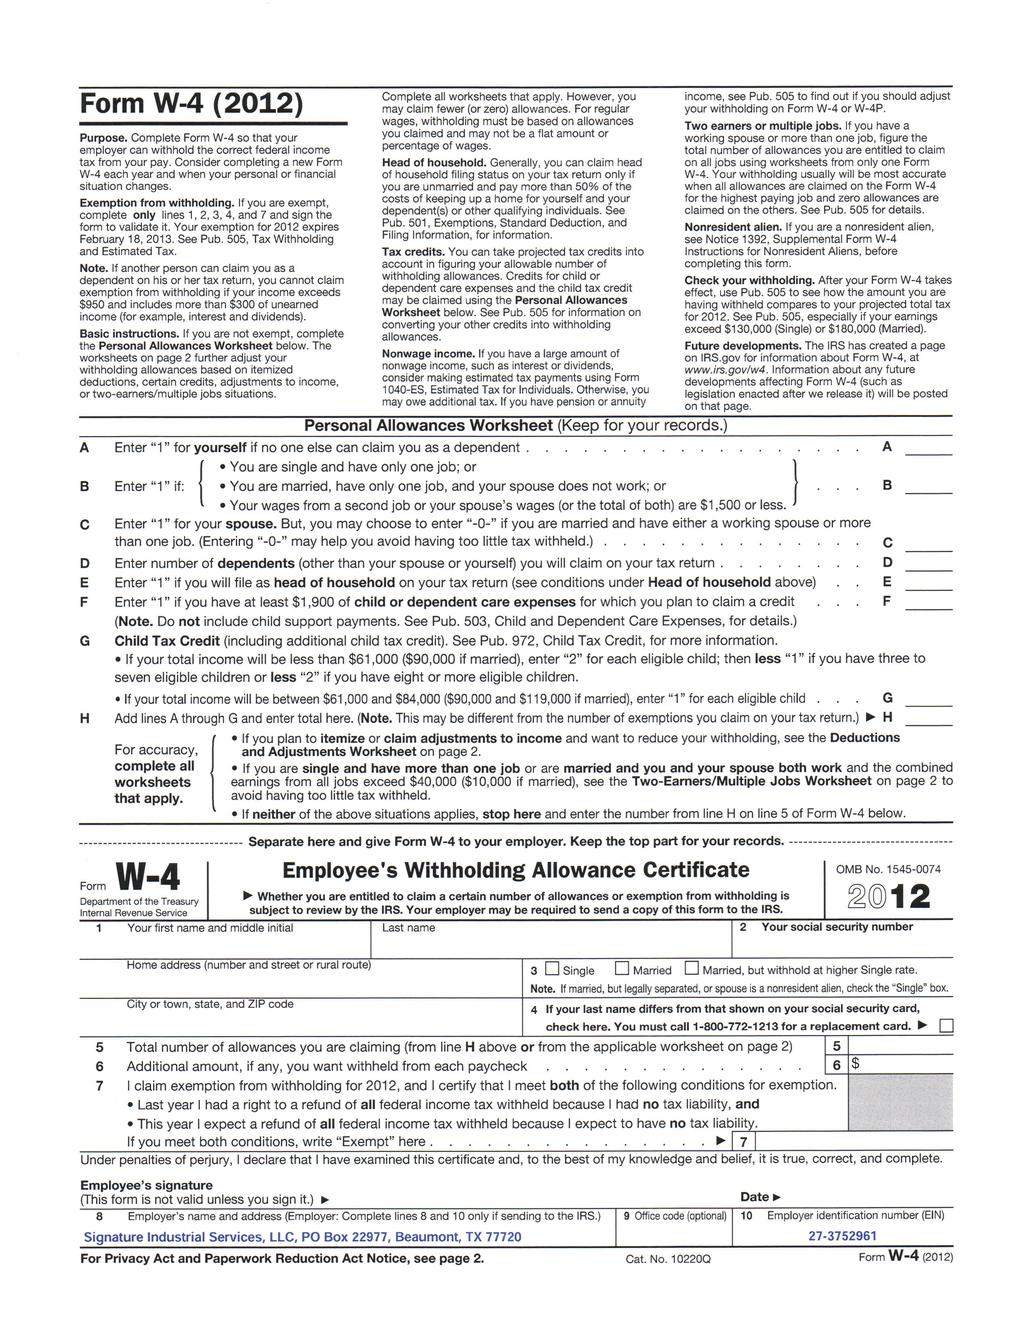 Form W-4 (2OL2) Purpose, Complete Form W-4 so that your employer can withhold the correct federal income tax from your pay.